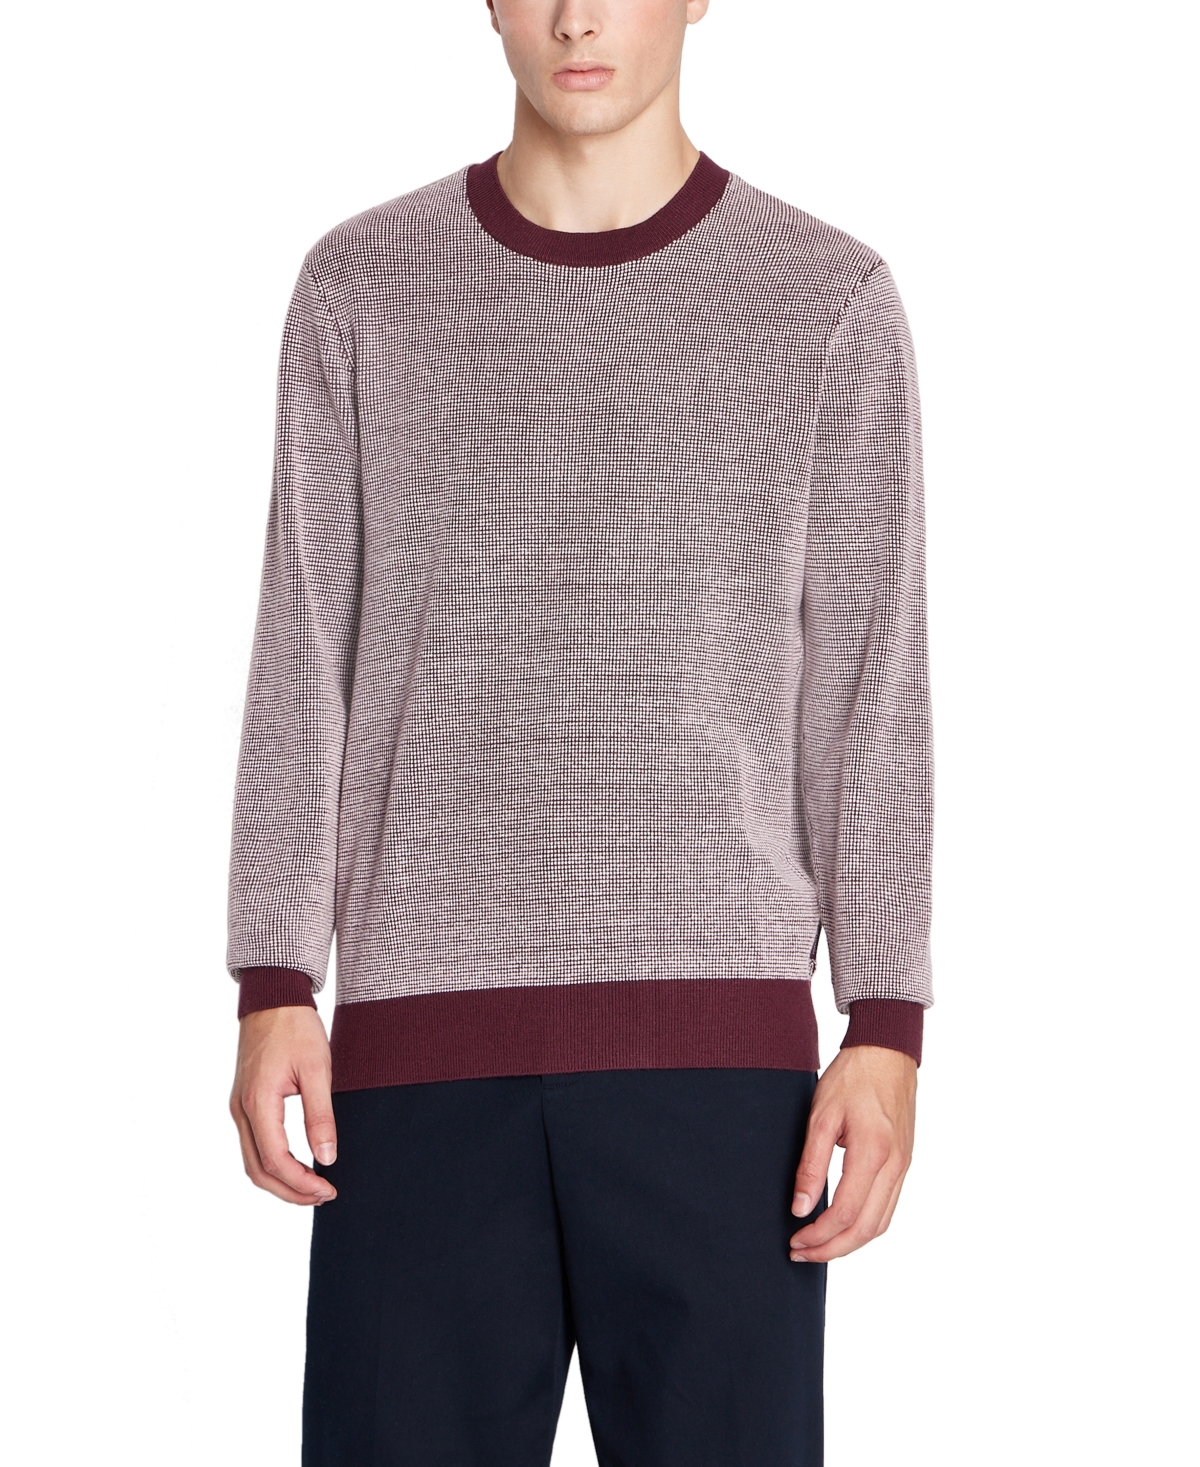 Ax Armani Exchange Men's Two Tone Crewneck Pullover Sweater In Vineyard W,off White